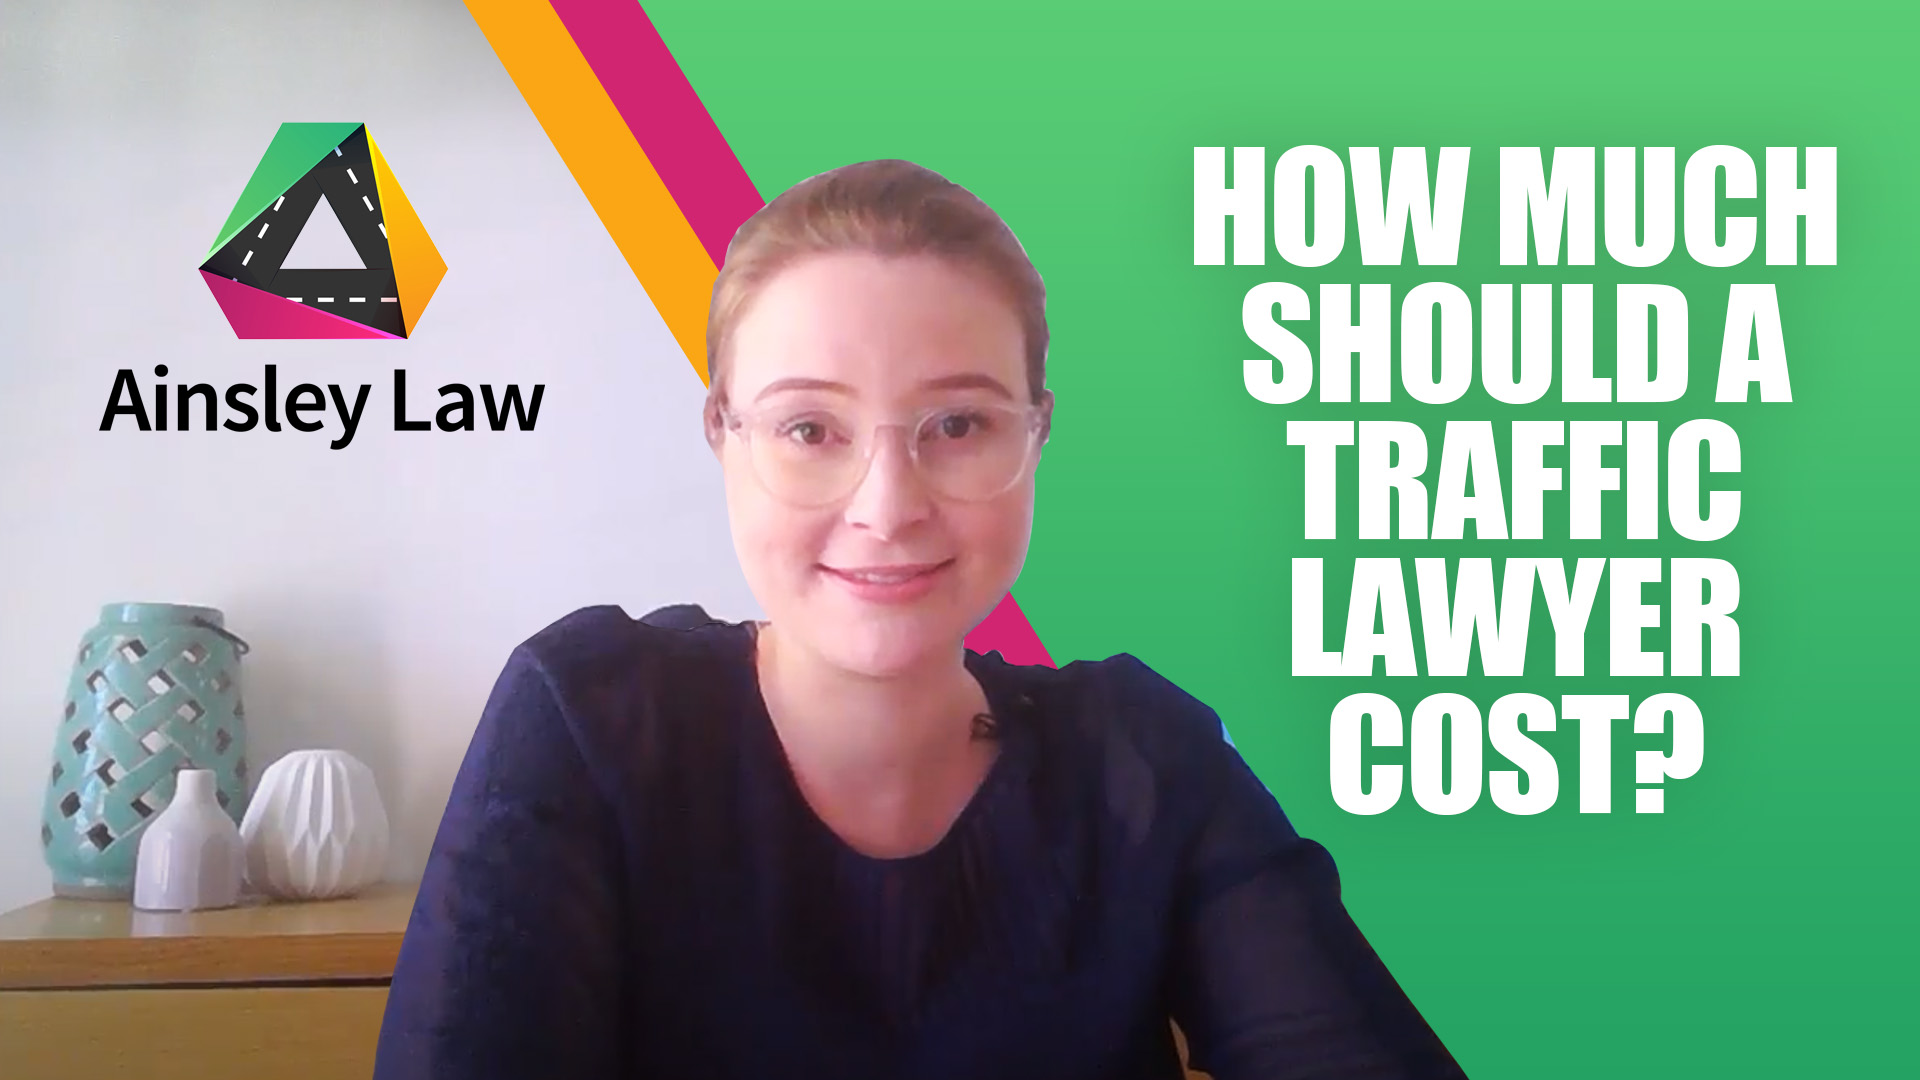 How Much Should A Traffic Lawyer Cost? Ainsley Law